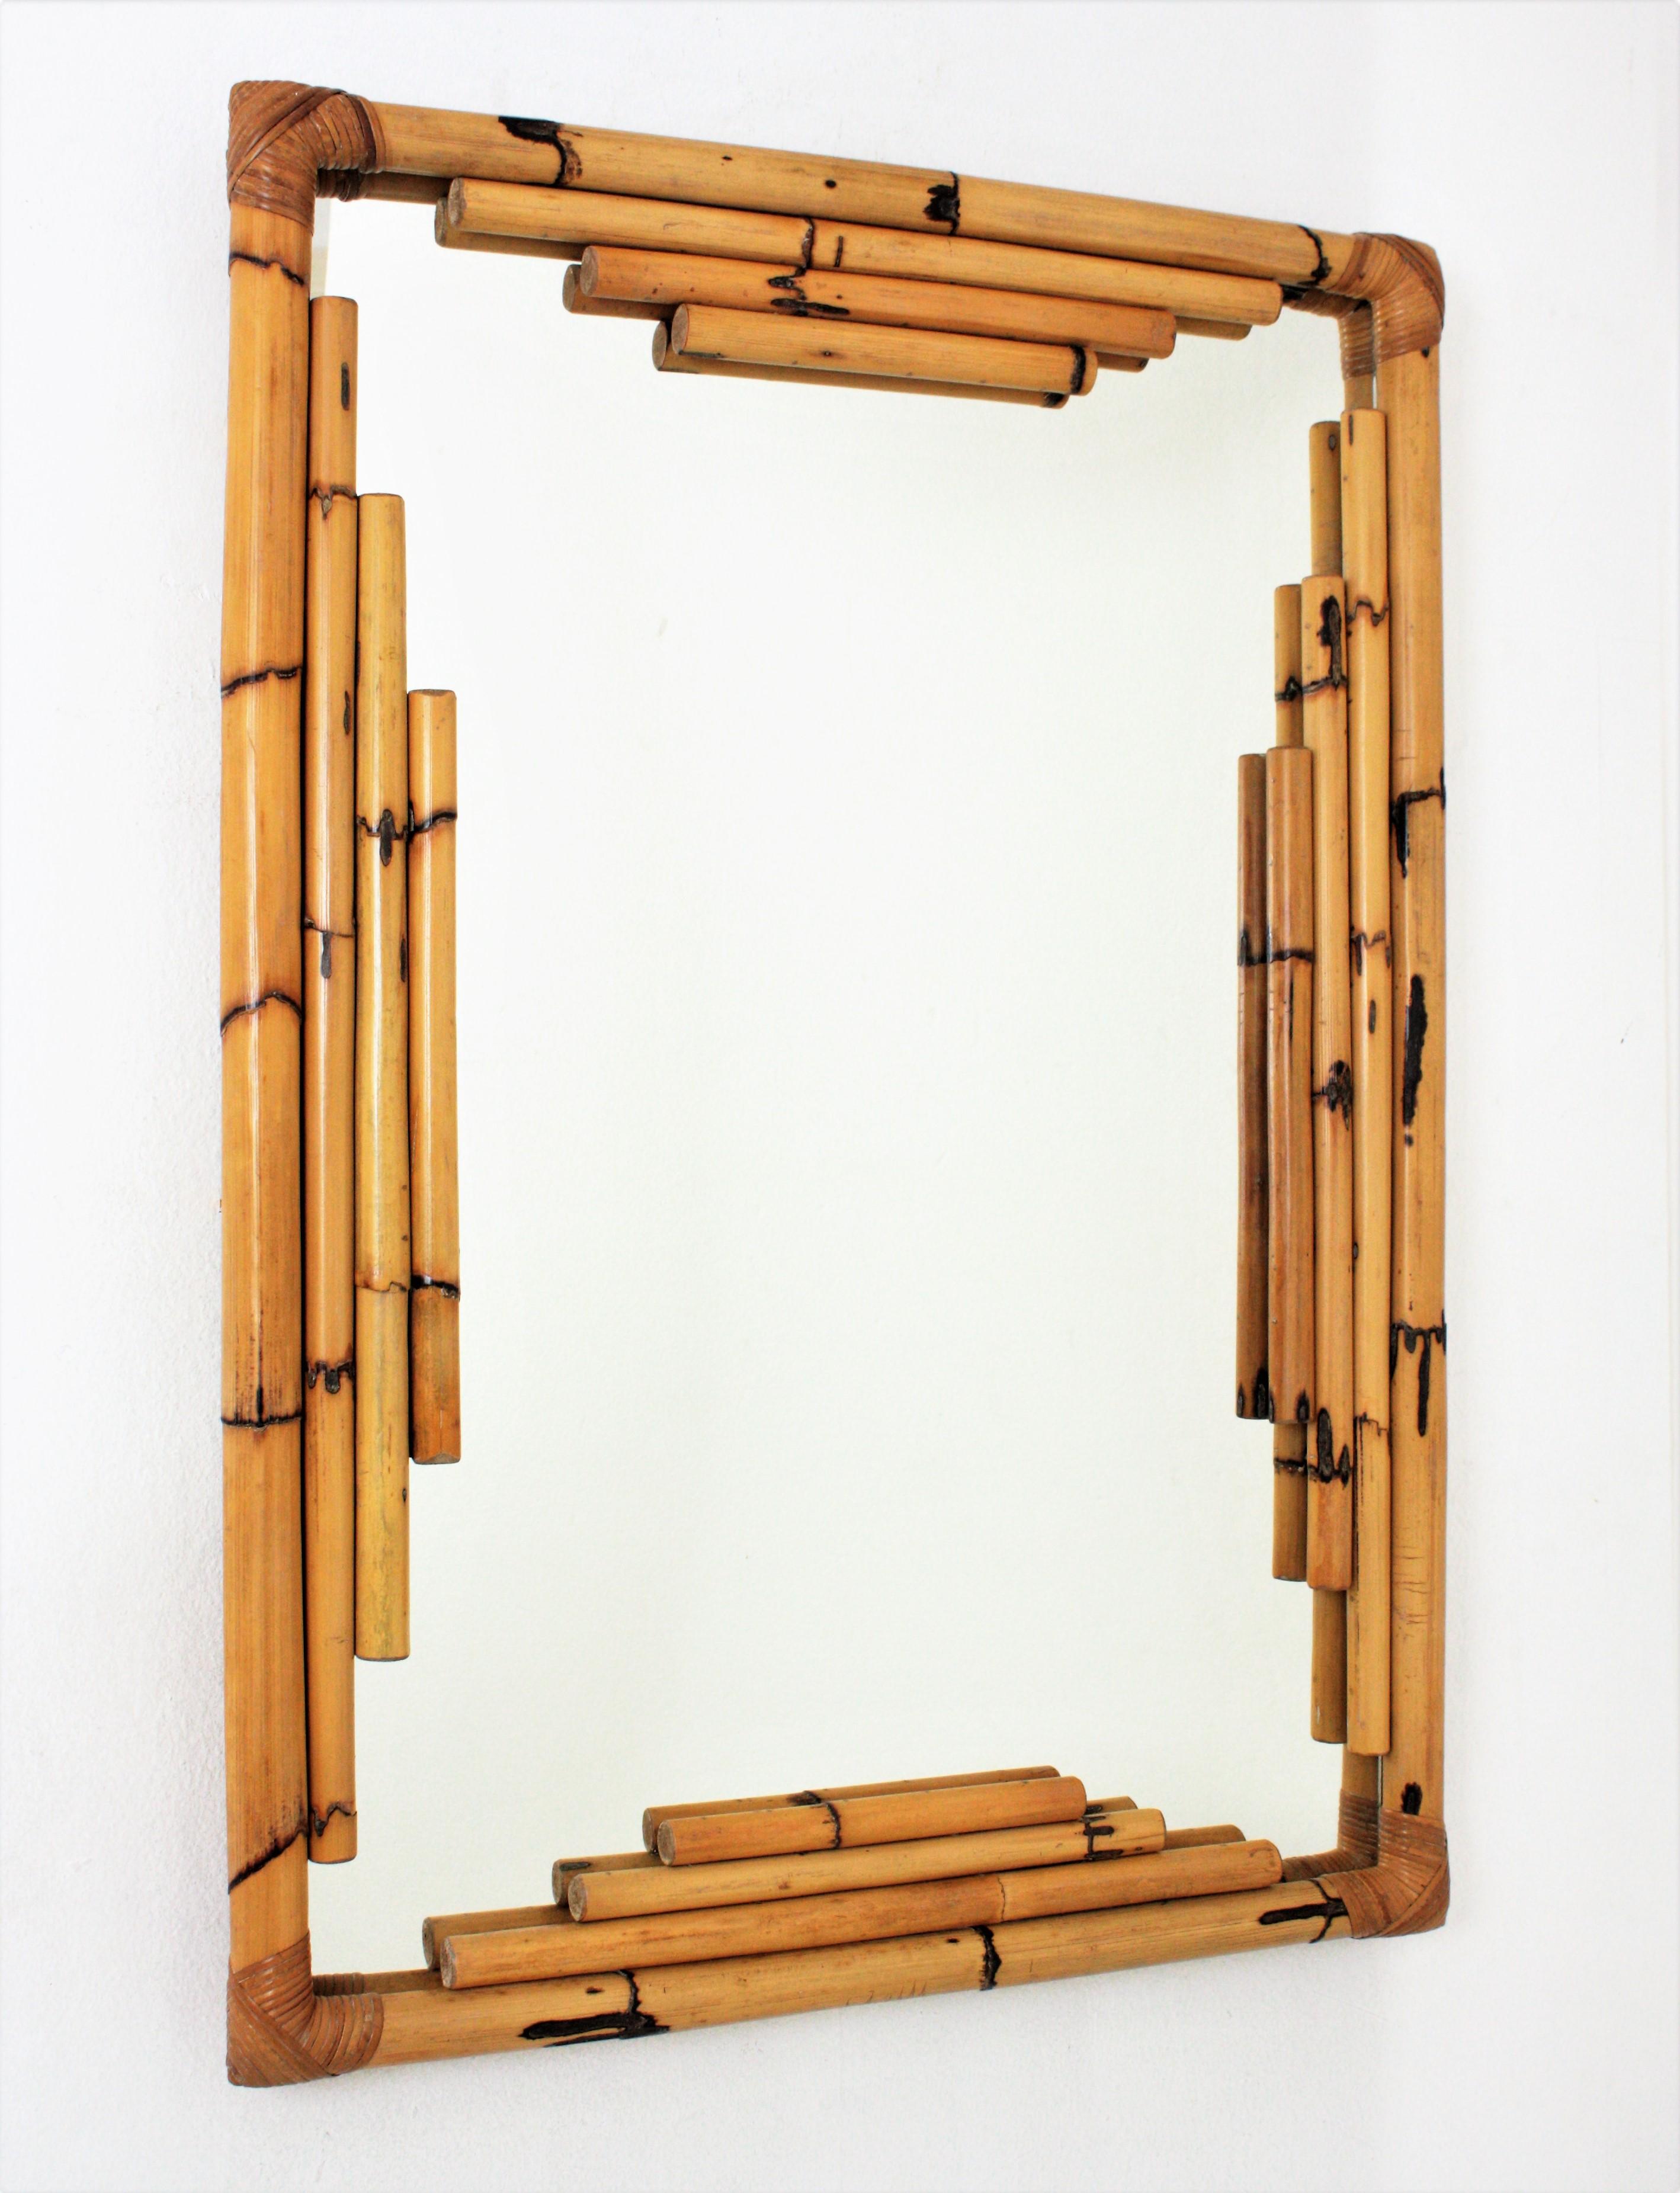 Spanish Mid-Century Modern Bamboo Chinoiserie Tiki style rectangular wall mirror. Spain, 1960s.
Gorgeous Tiki style rectangular mirror handcrafted with bamboo canes. It has a highly decorative frame with oriental inspired geometric decorations and a